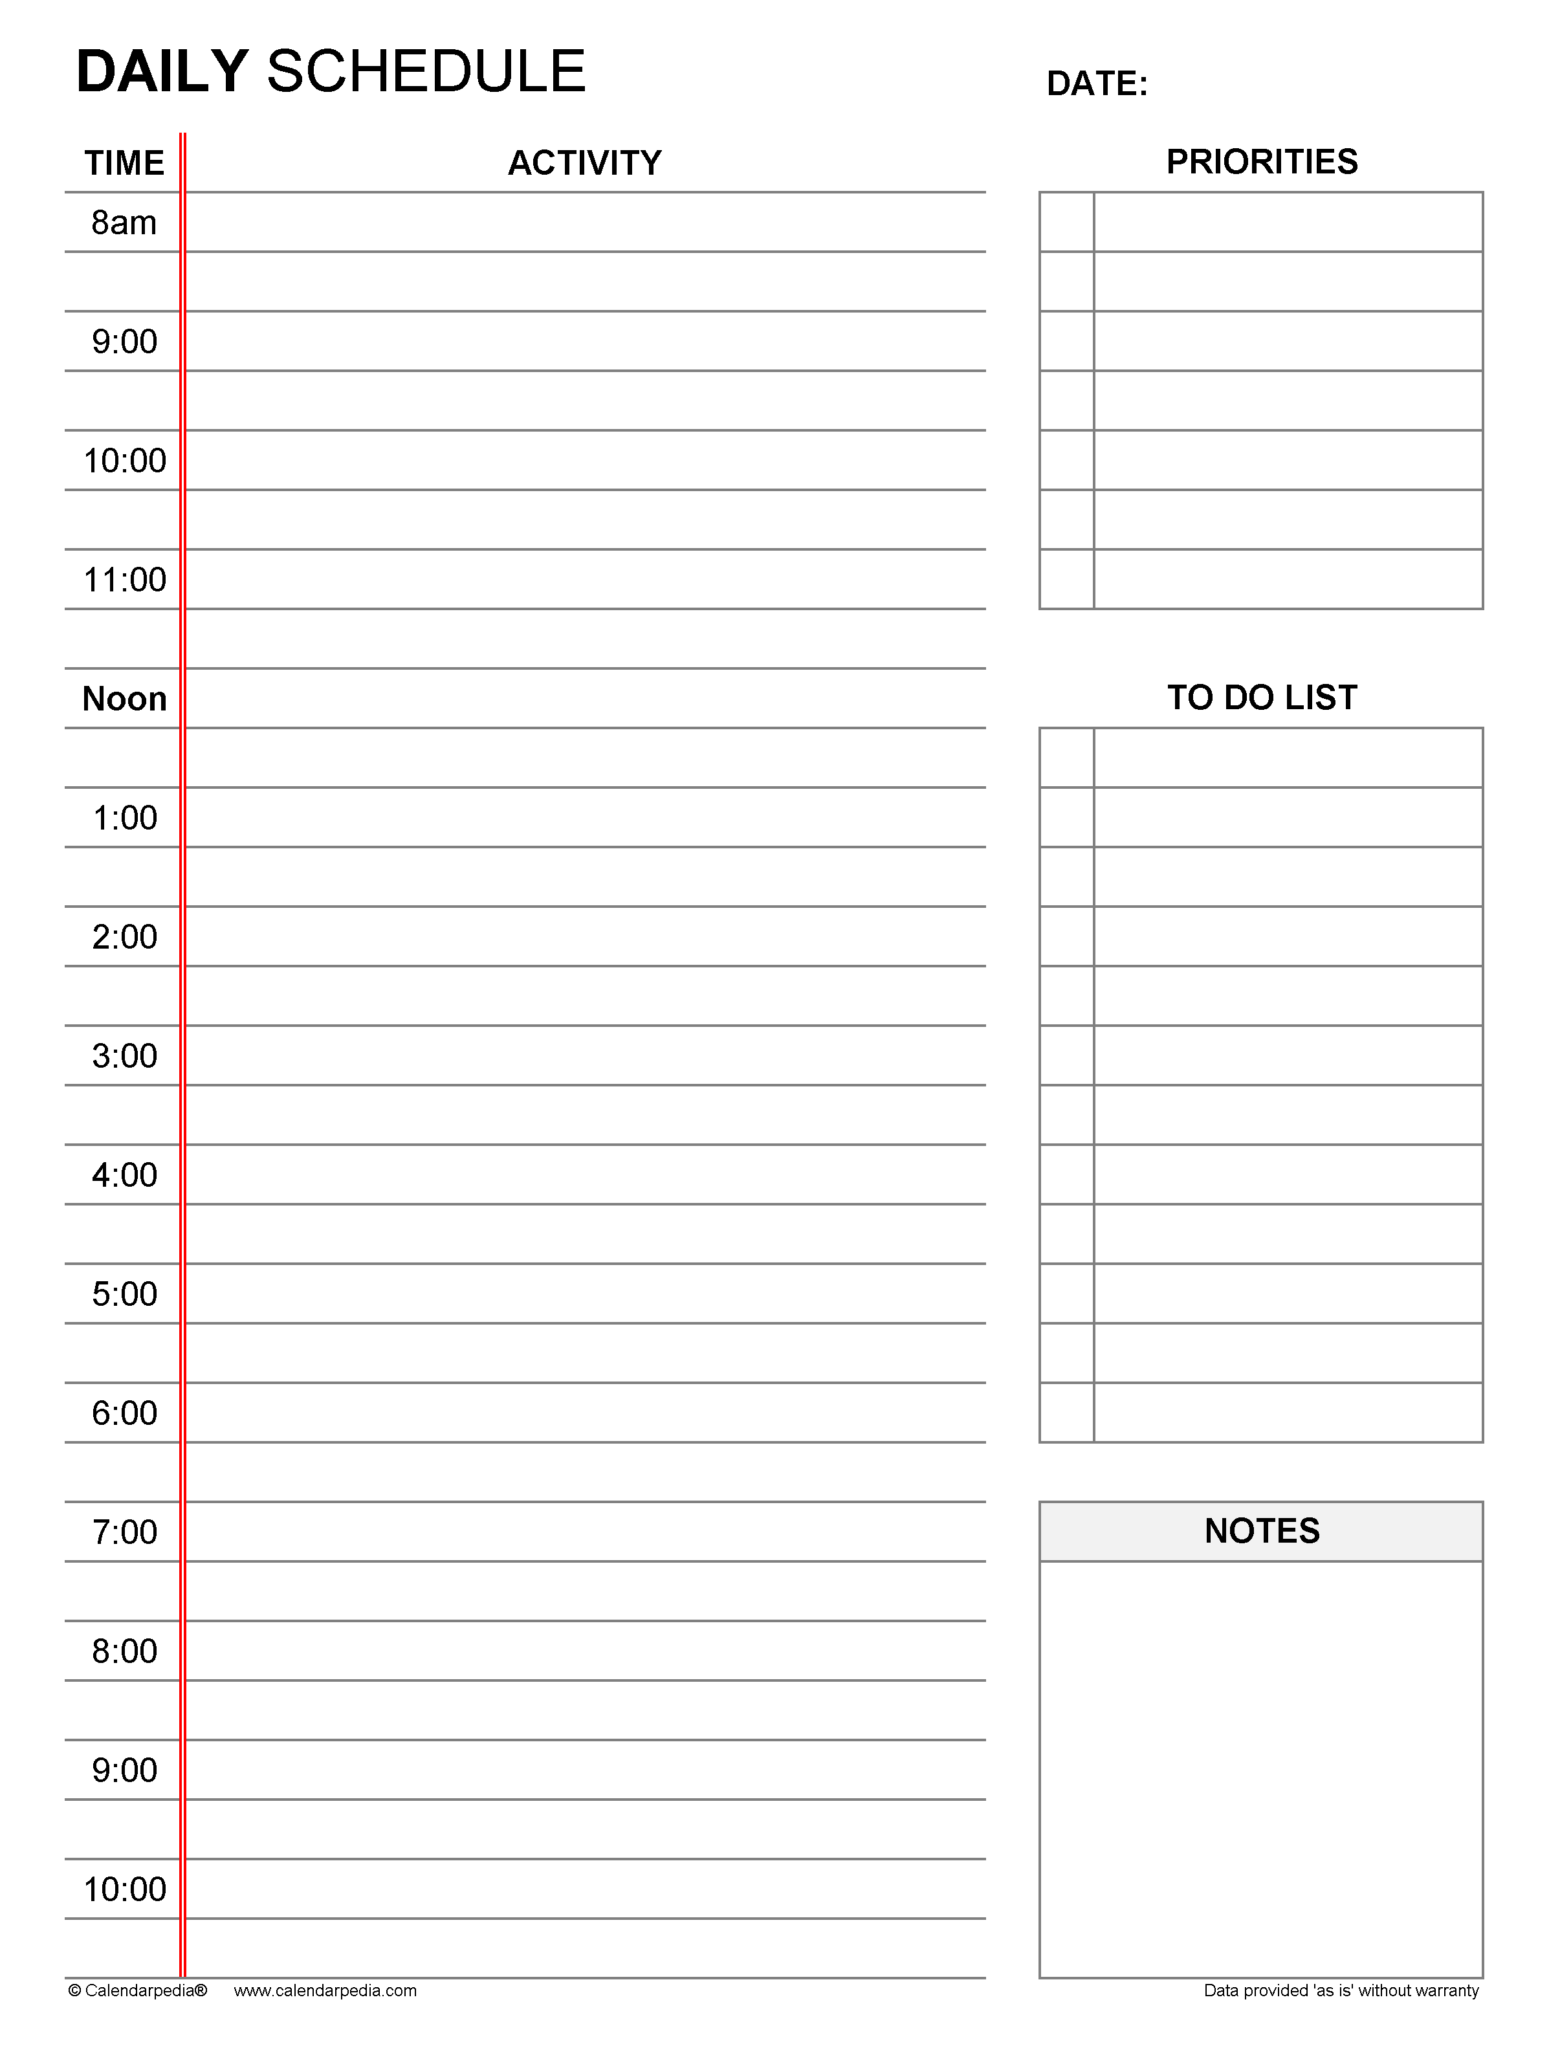 free-daily-schedules-in-pdf-format-10-templates-in-printable-blank